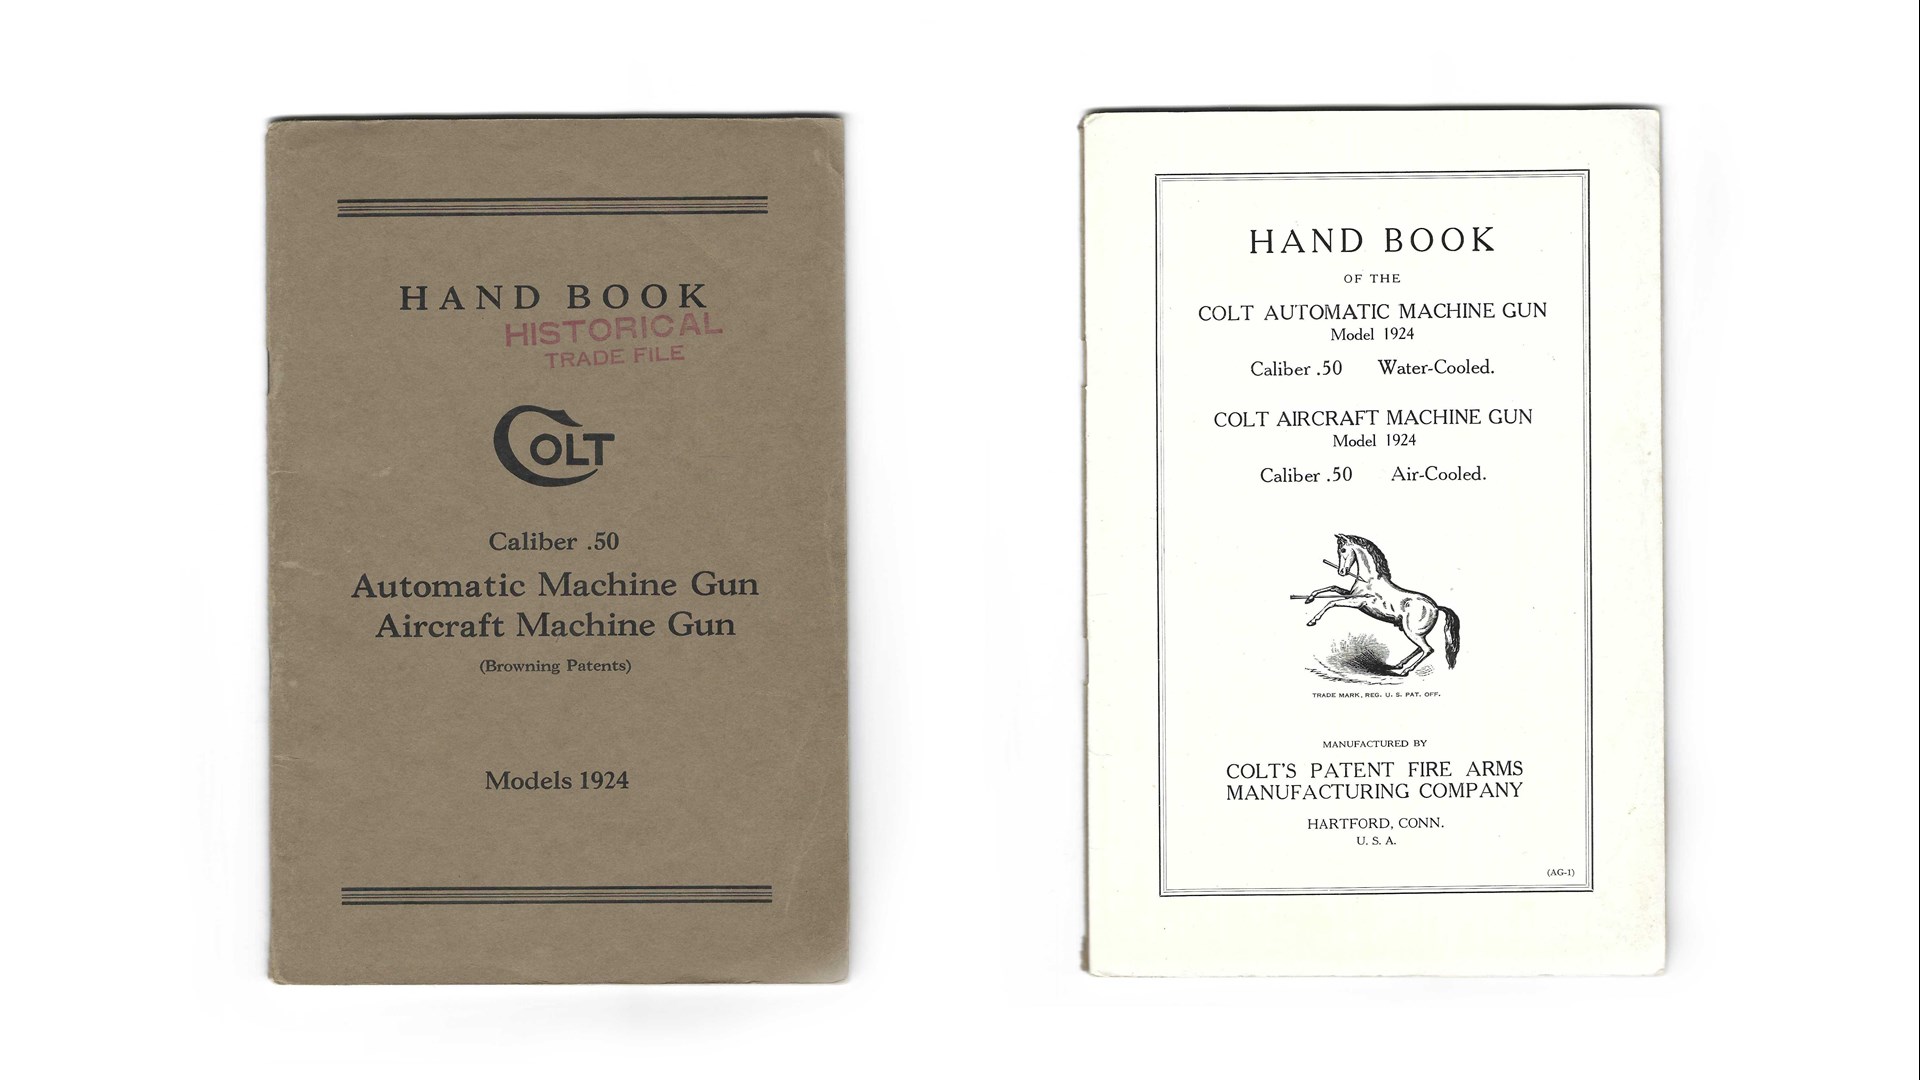 Cover and title page of the Colt Model 1924 Handbook